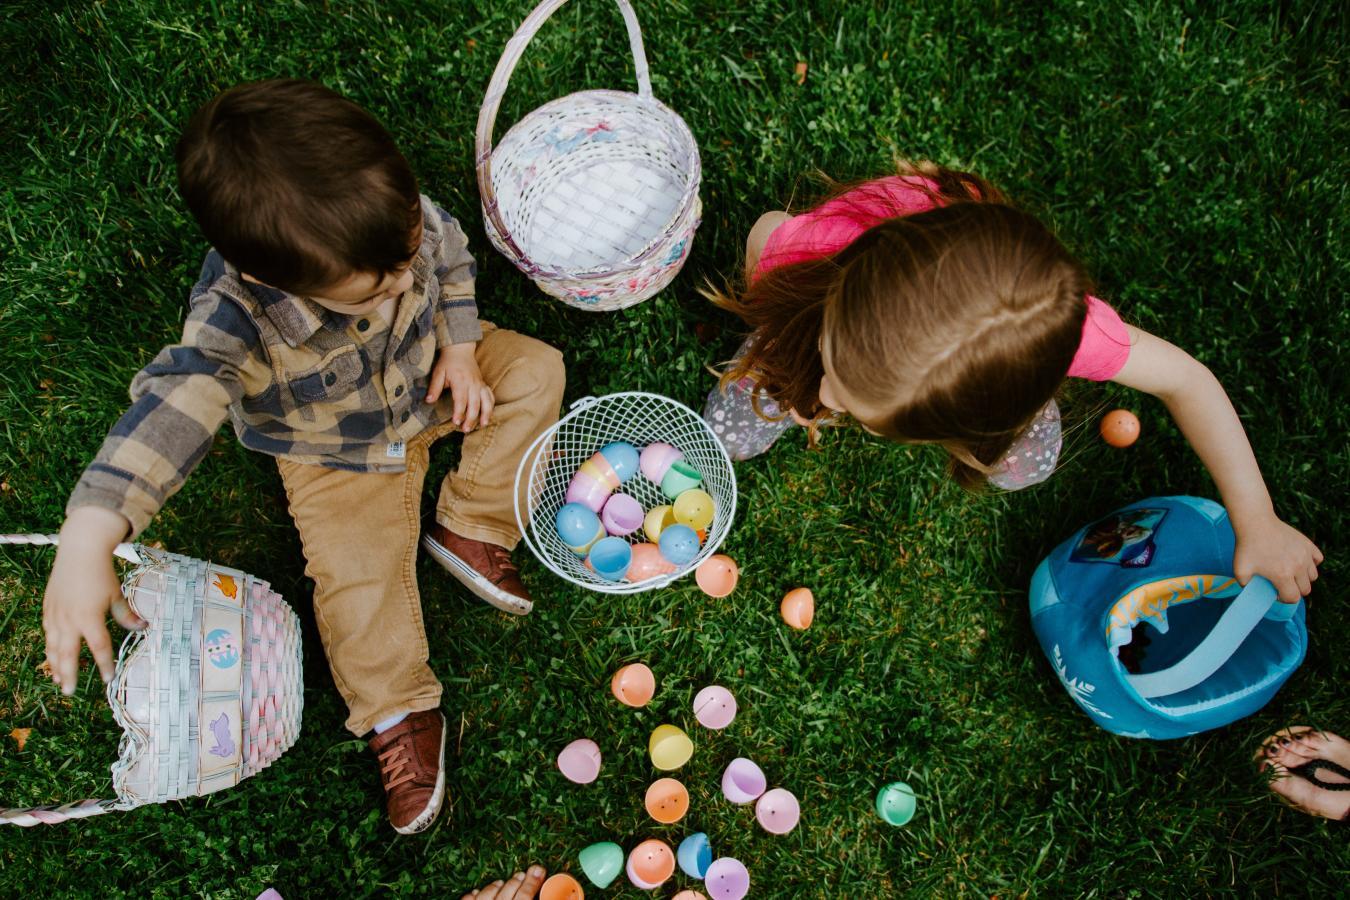 Erin's Easter Egg hunt will take place on Saturday, April 1st. 